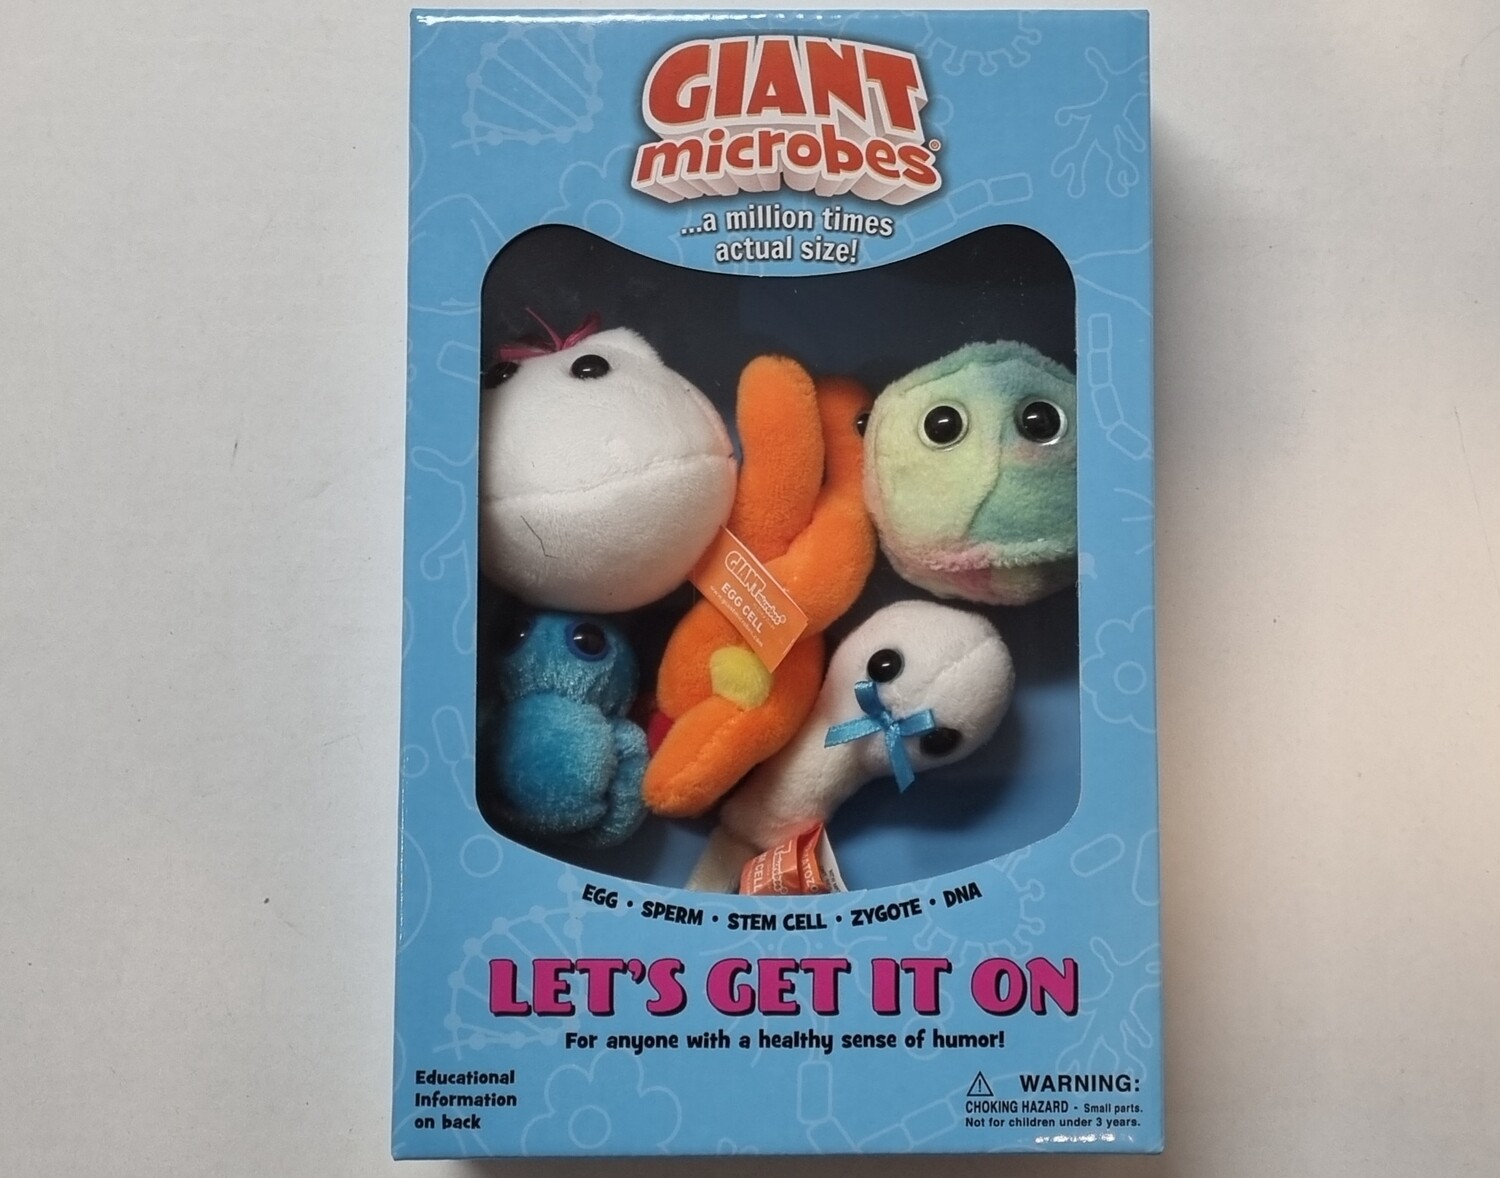 Giant Microbes, let's get it on